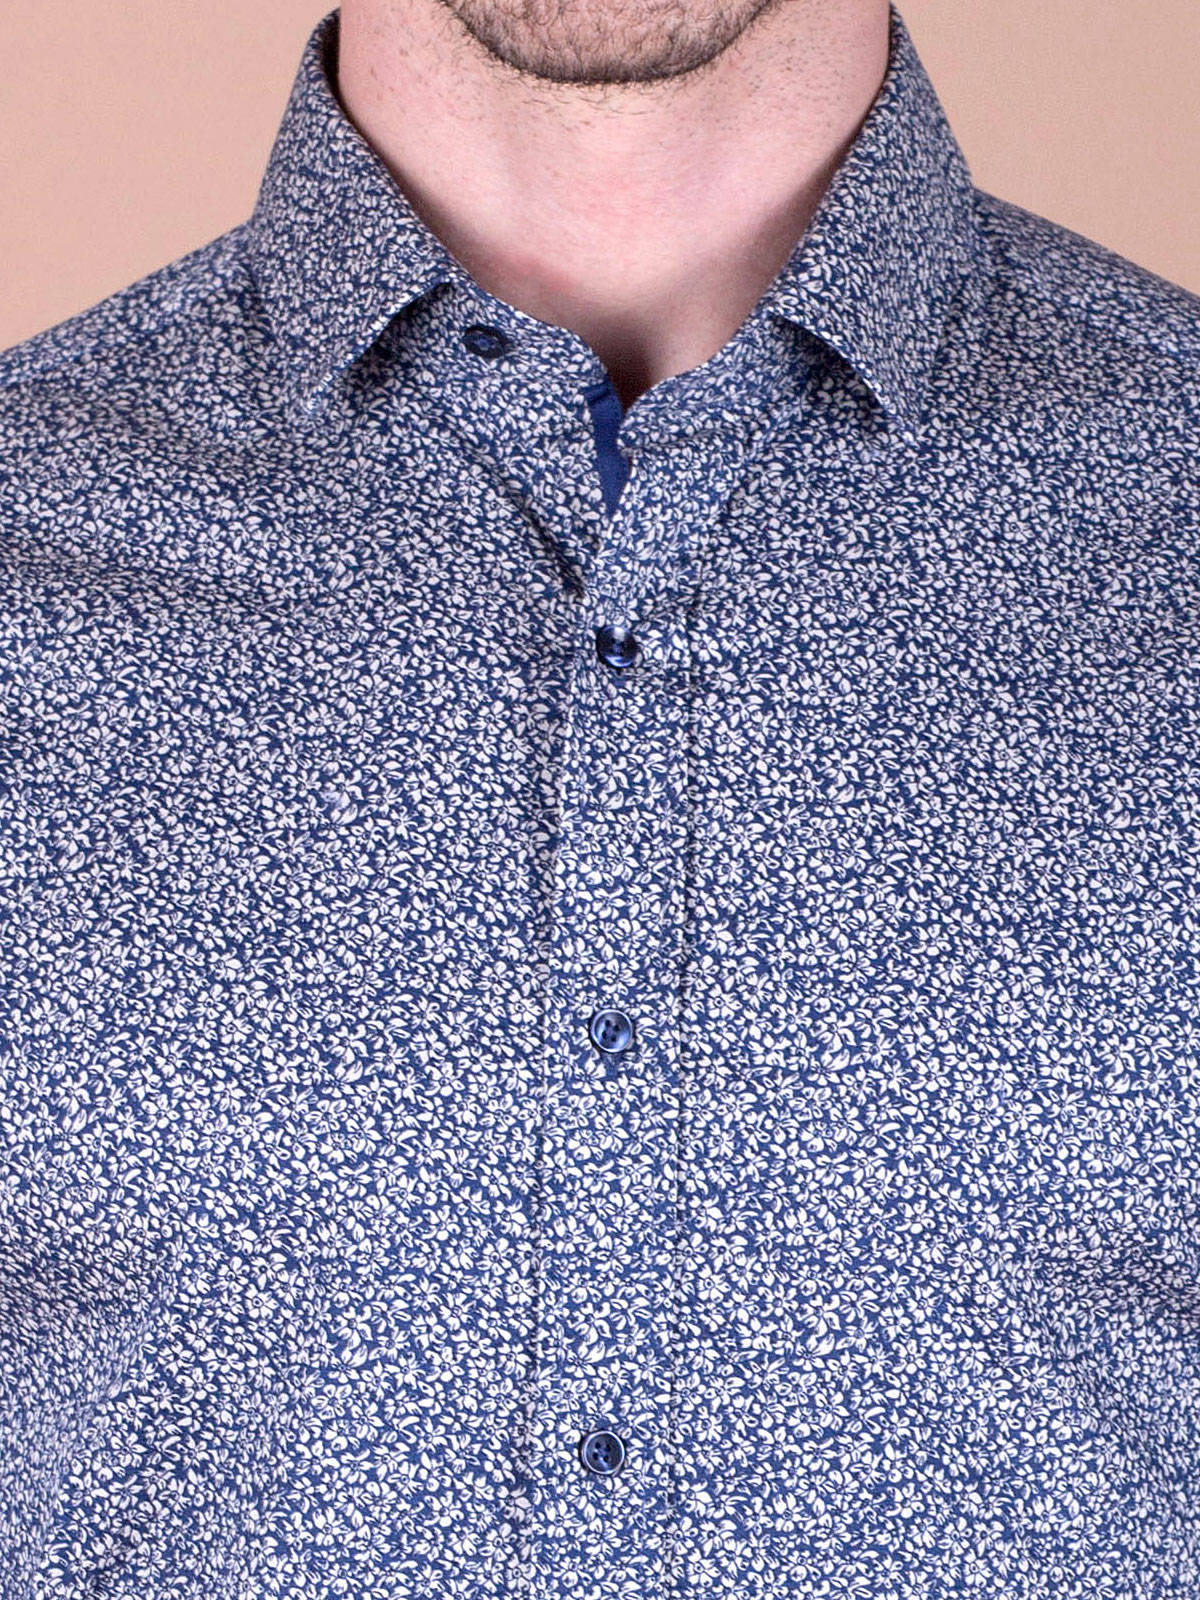 Blue shirt with tiny white flowers - 21391 € 21.93 img3